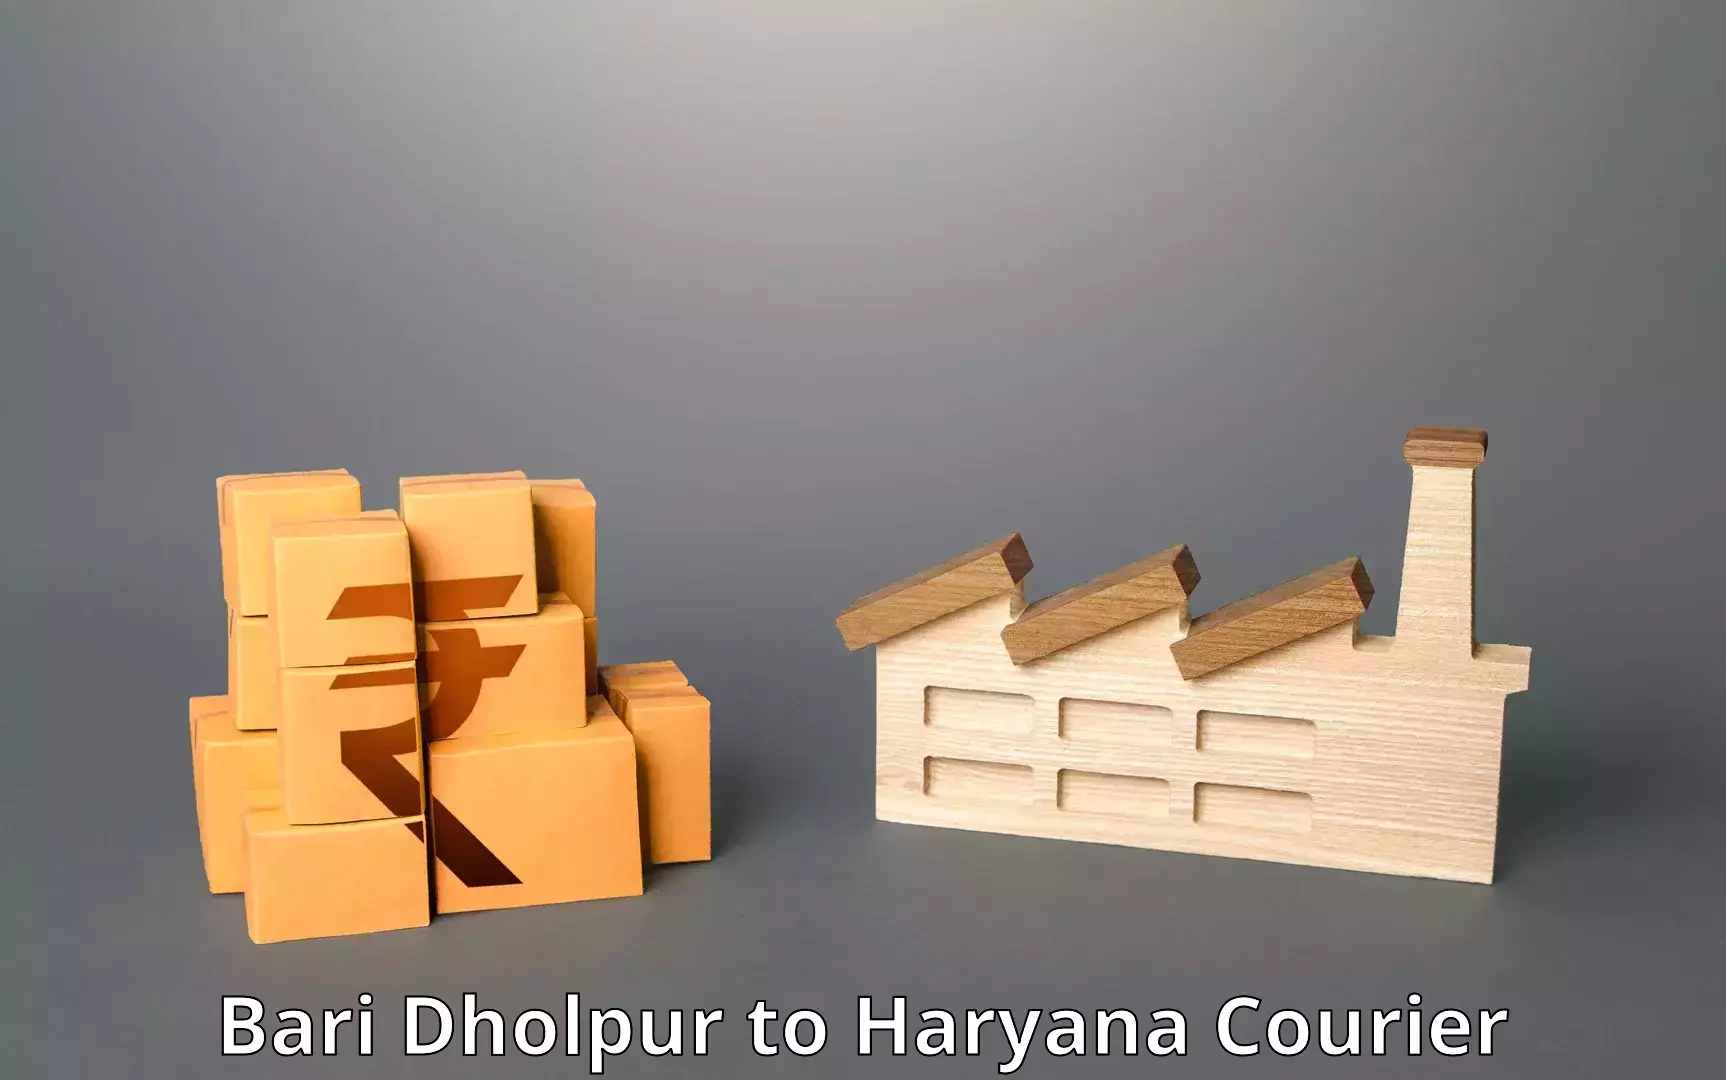 Courier service booking Bari Dholpur to Haryana